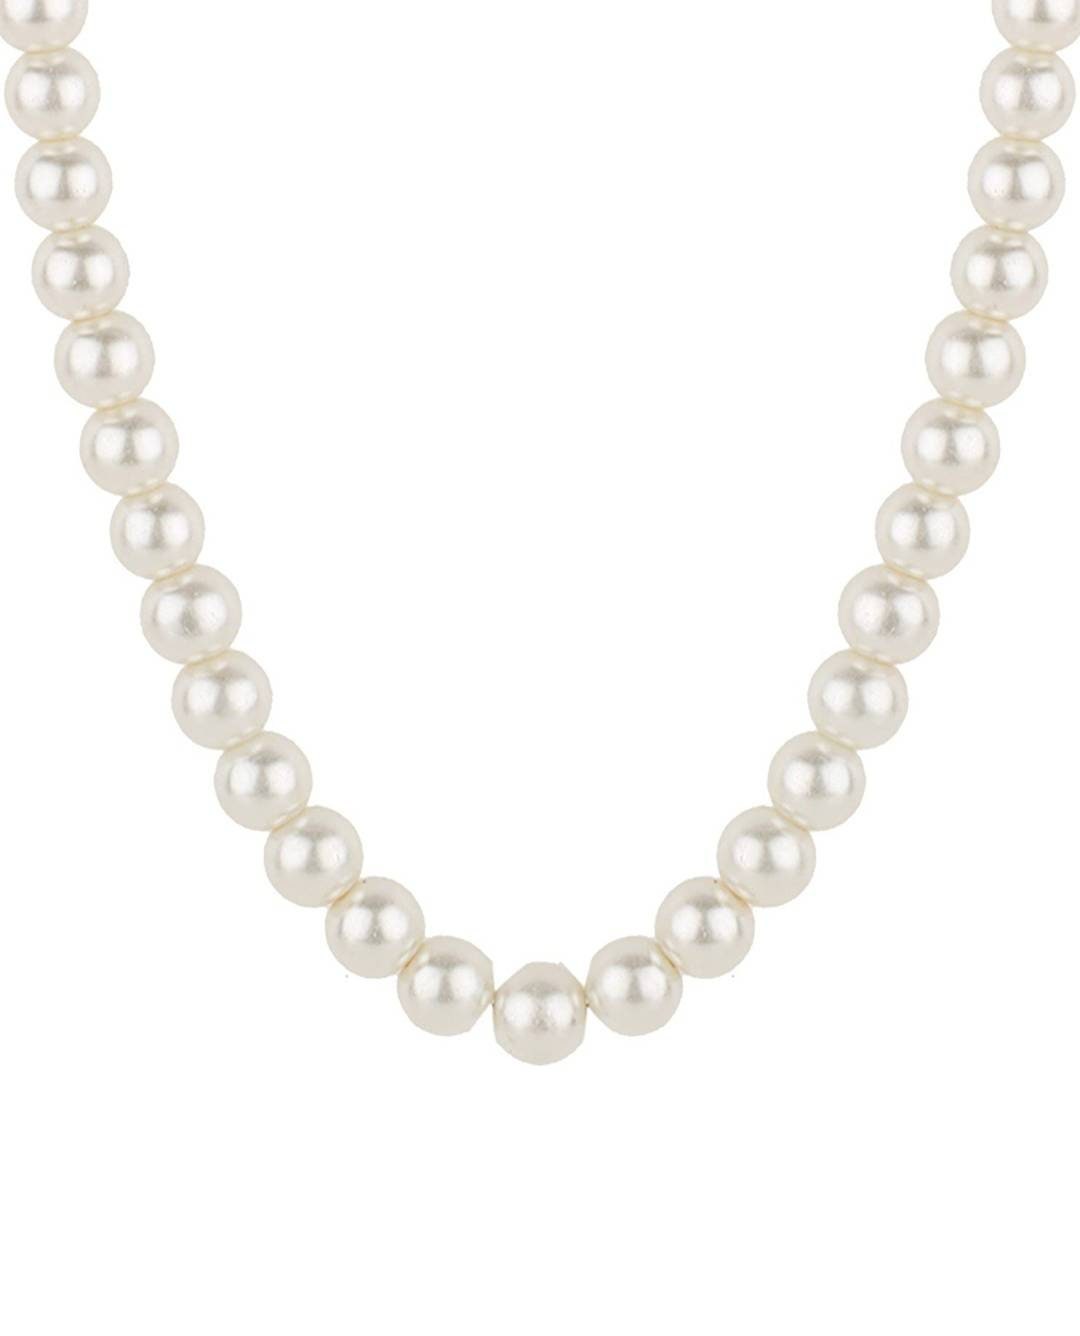 Pearl Hands Necklace, Elegant Necklace With Real Pearls, Valentine’s Day Gift, Special Day Gifts, Wedding, Mom Gift, Gift for Her | Save 33% - Rajasthan Living 9